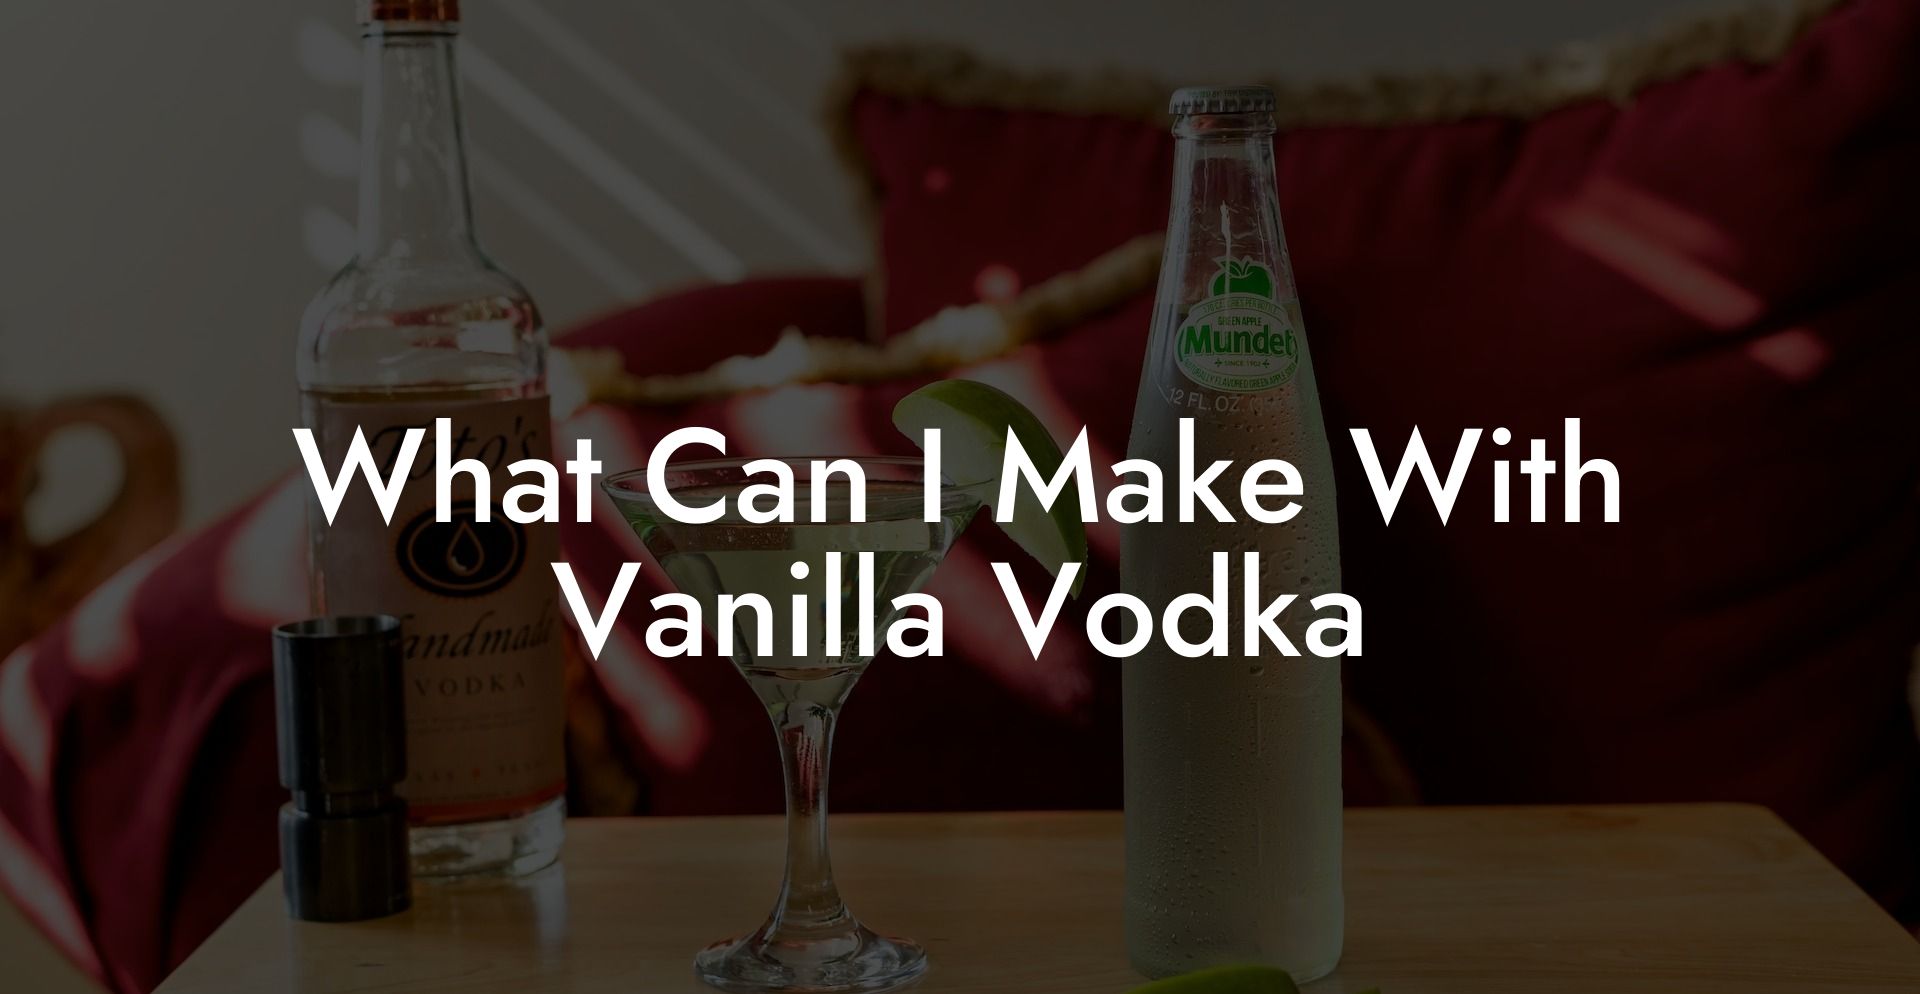 What Can I Make With Vanilla Vodka